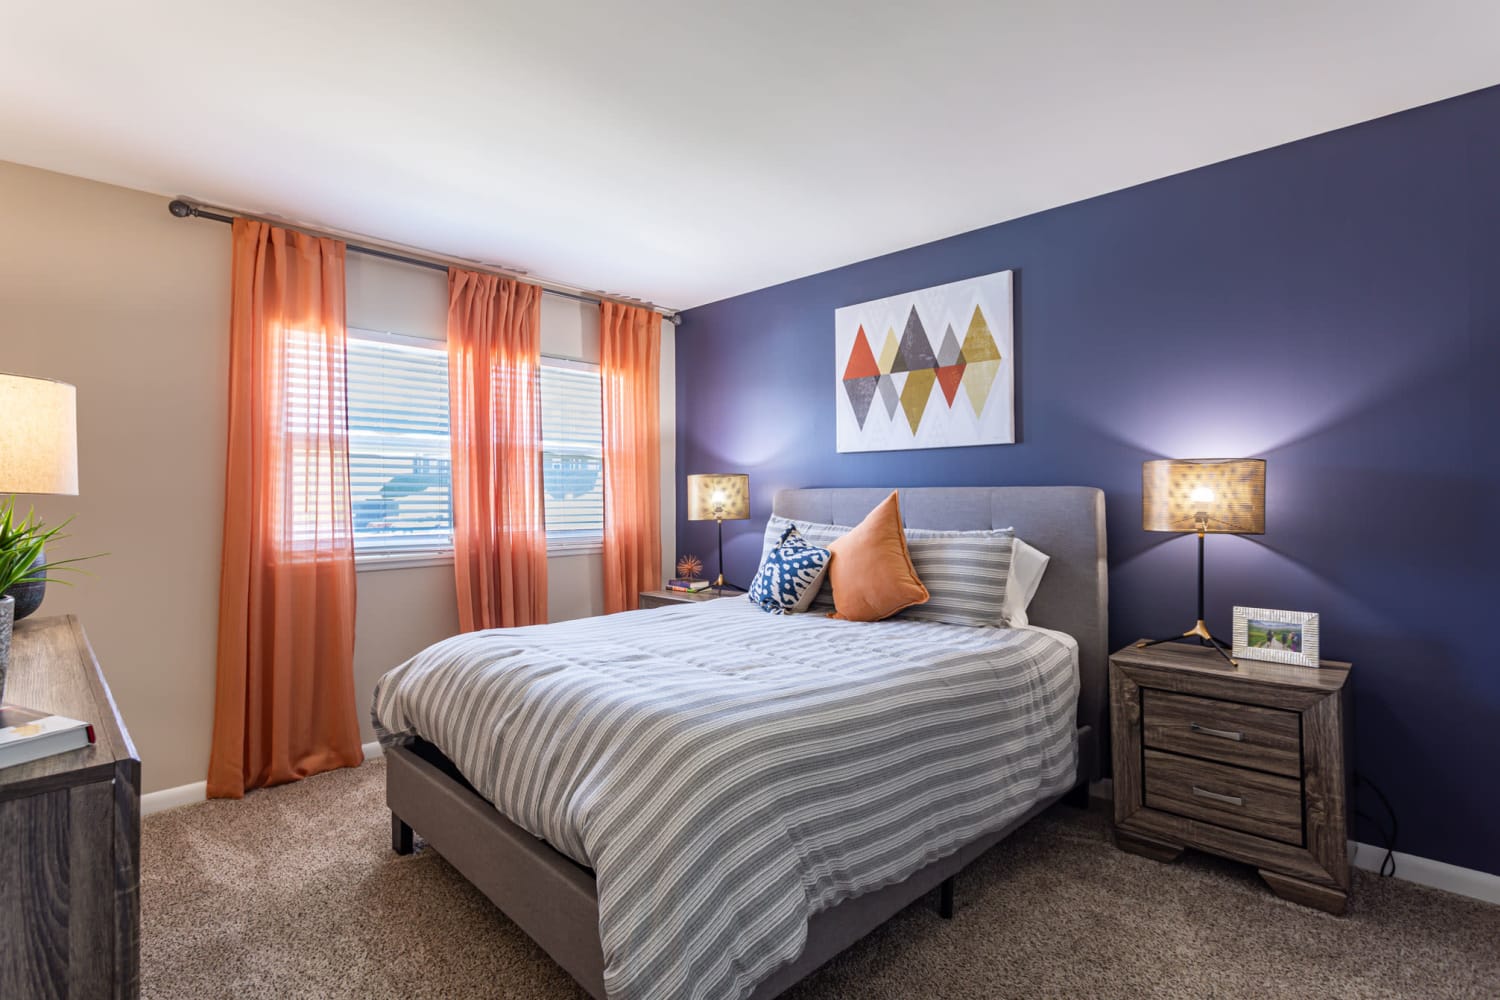 Luxurious and spacious bedroom with access to natural lighting at Mallards Landing Apartment Homes in Nashville, Tennessee